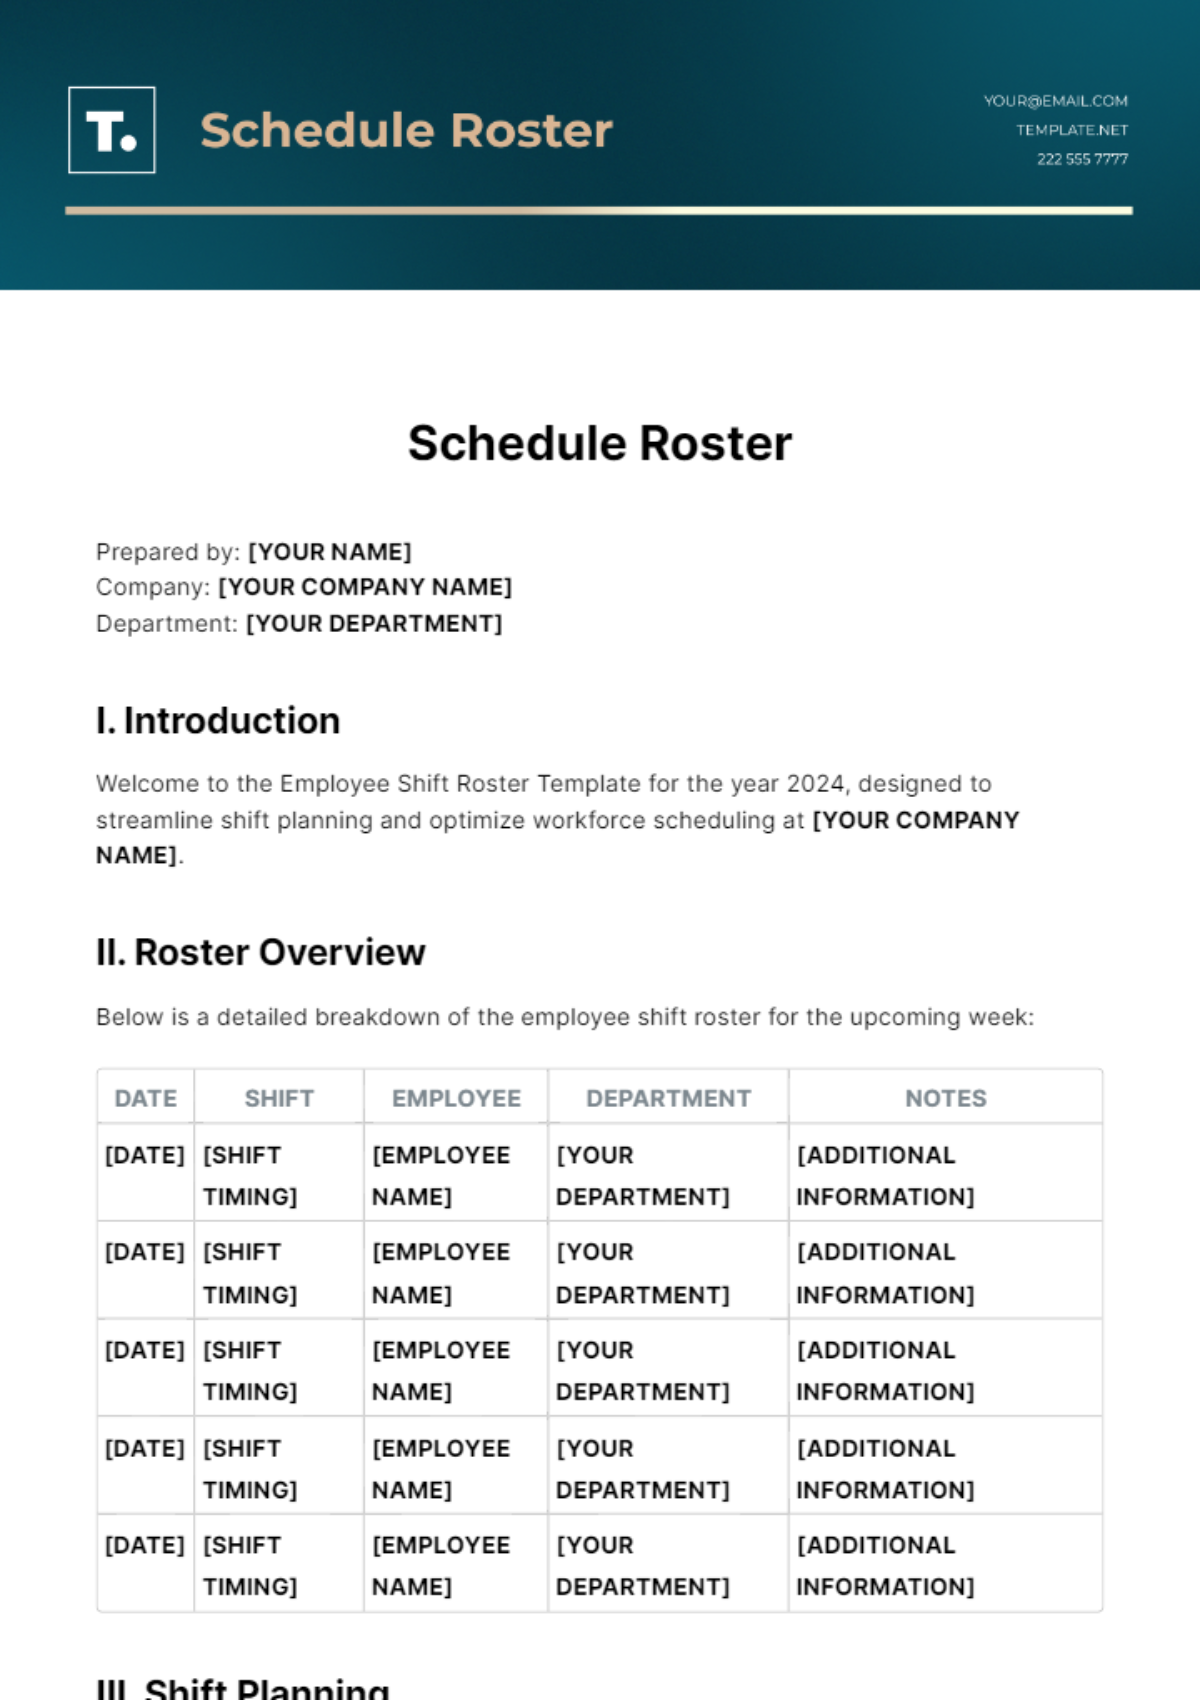 Schedule Roster Template